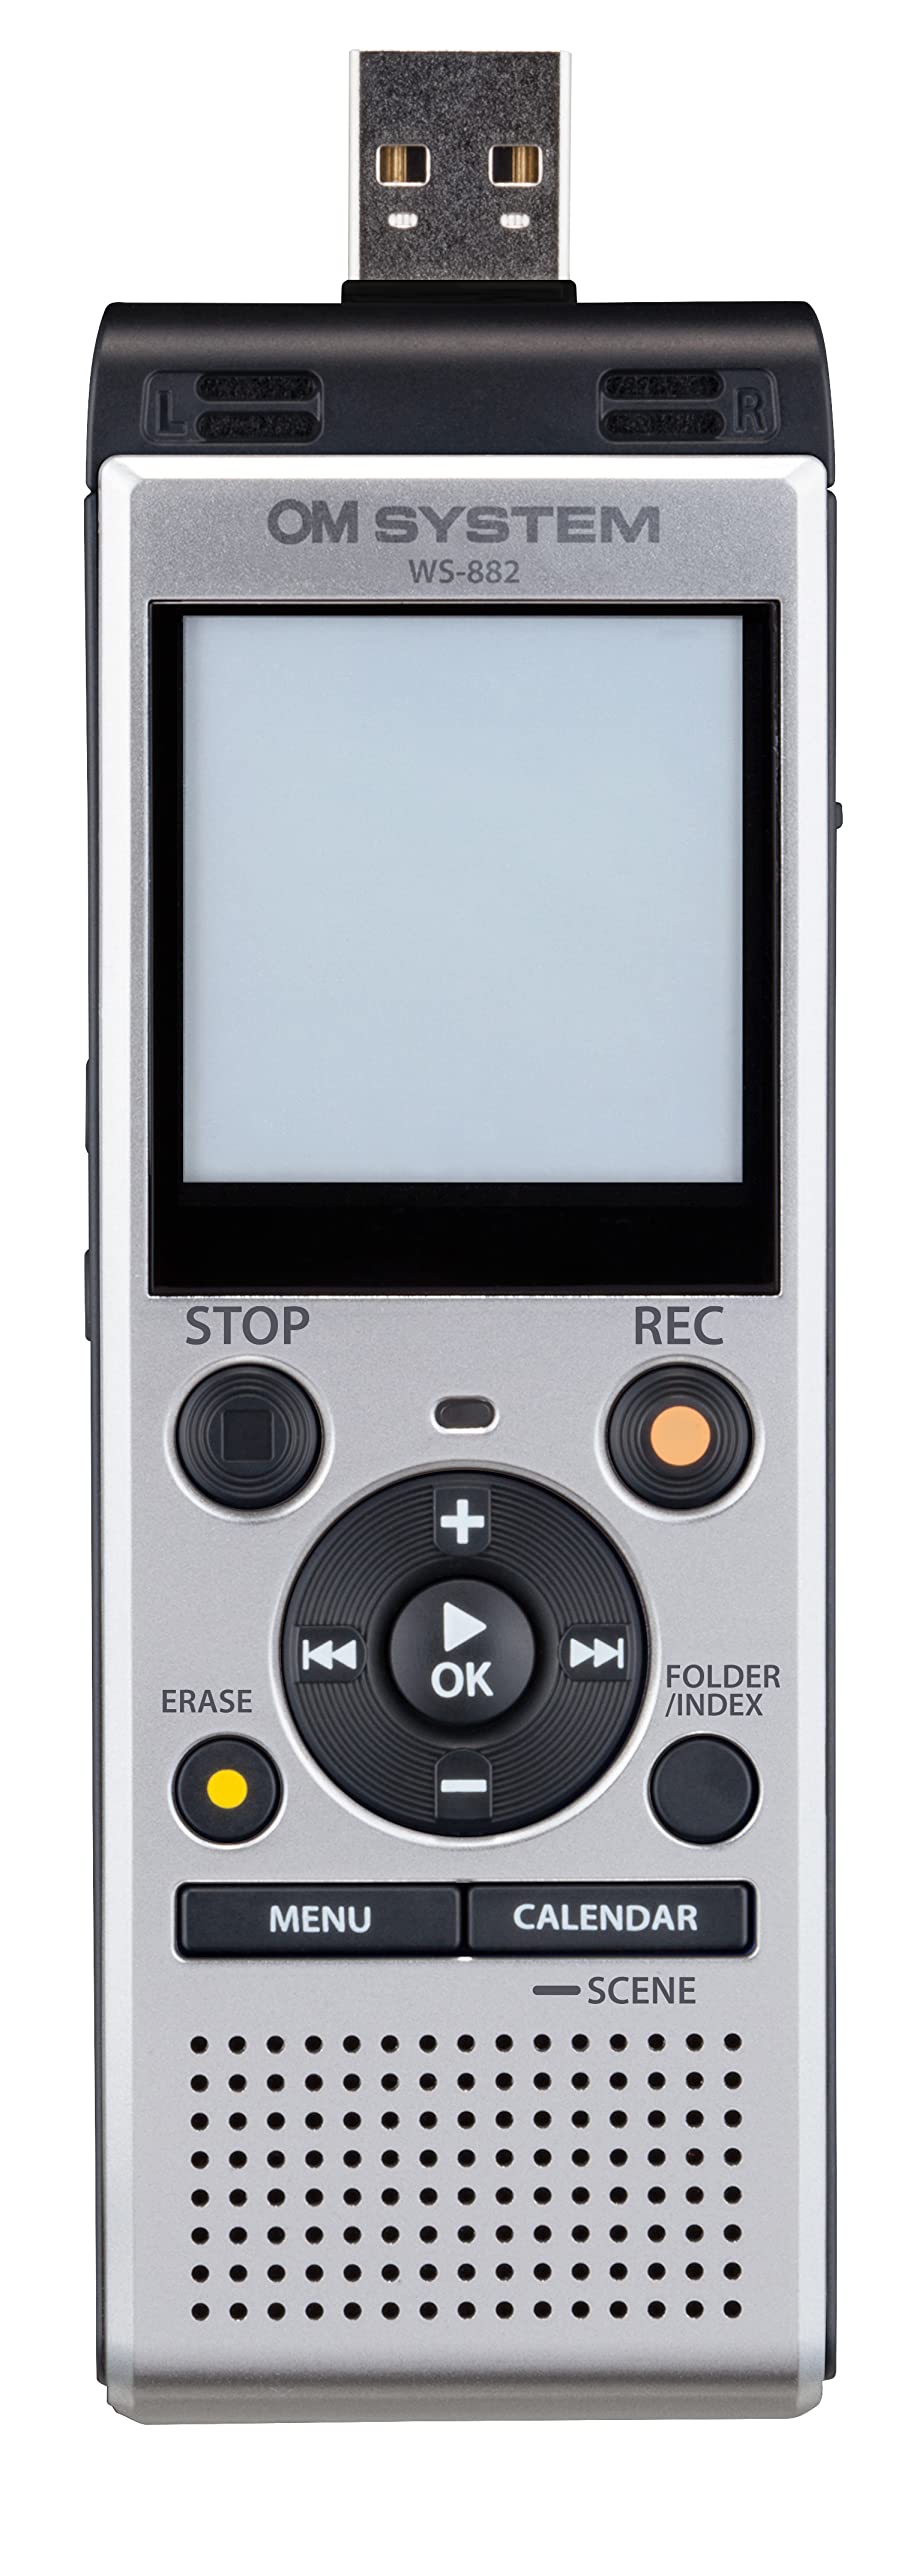 Olympus OM System WS-882 Digital Voice Recorder, with Linear PCM/MP3 Recording Formats, USB Direct, 4gb Playback Speed and Volume Adjust, File Index, Erase Selected Files